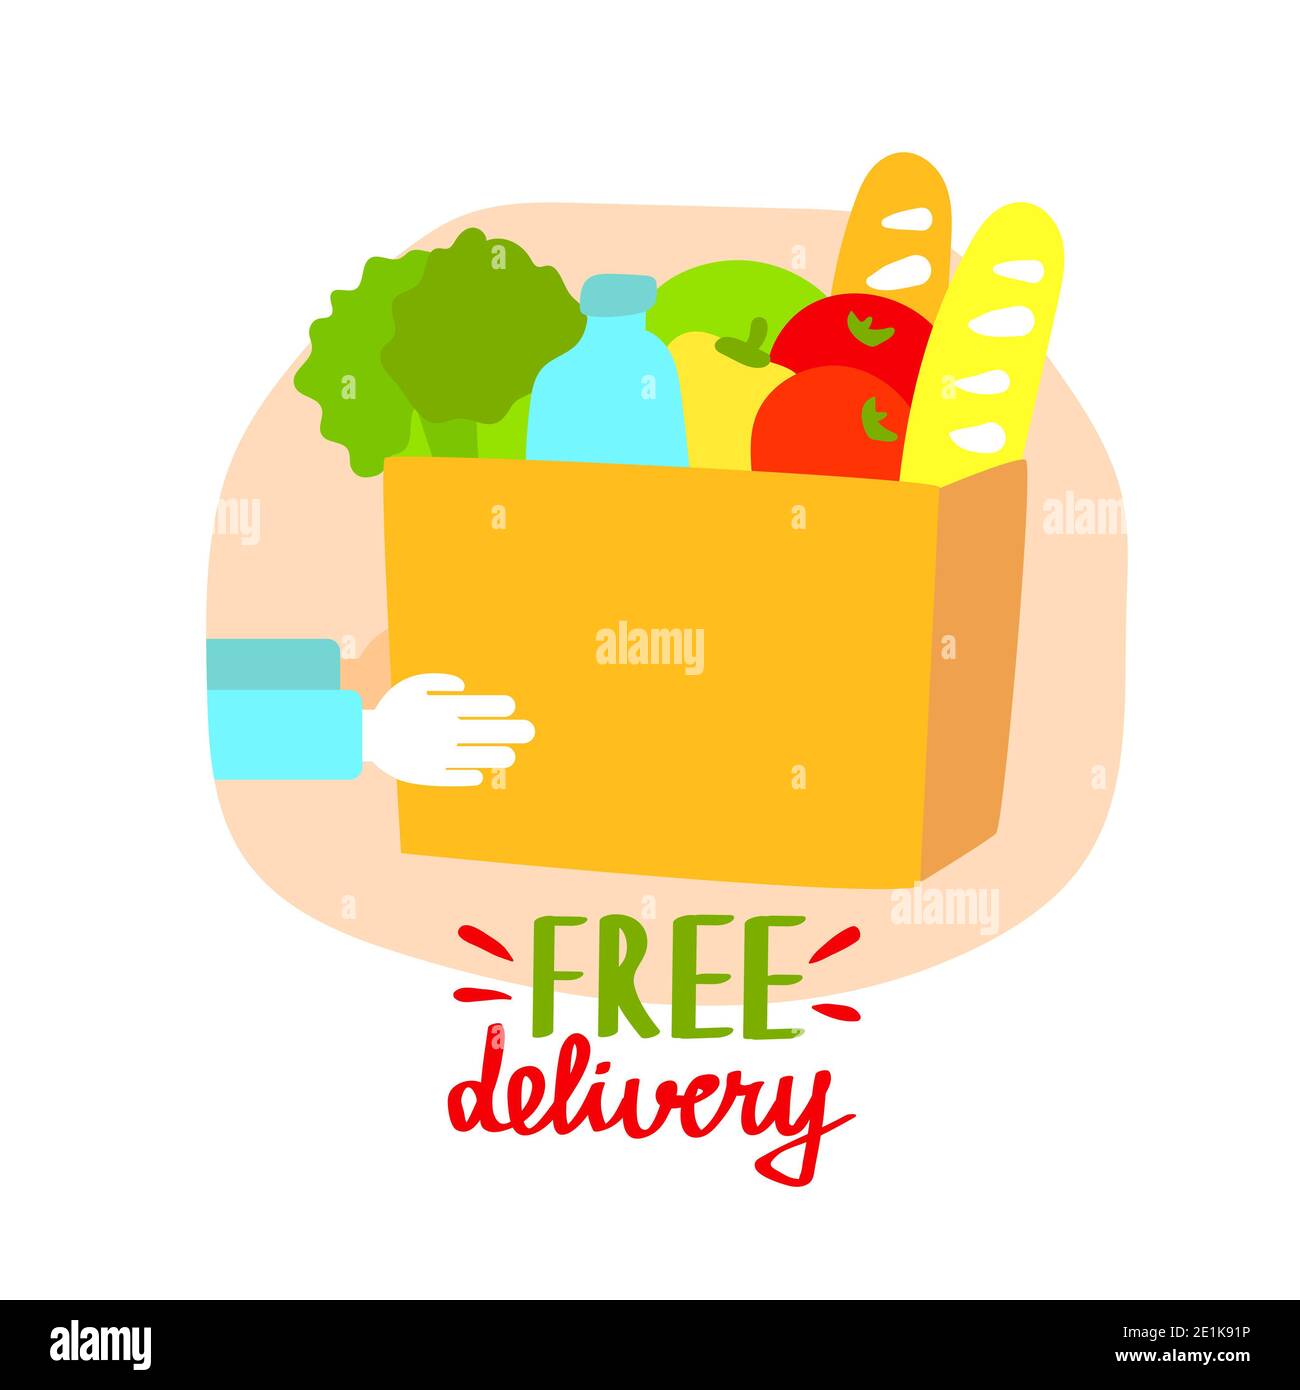 Vector flat illustration of grocery shopping banner, free delivery with various goods. Stock Photo